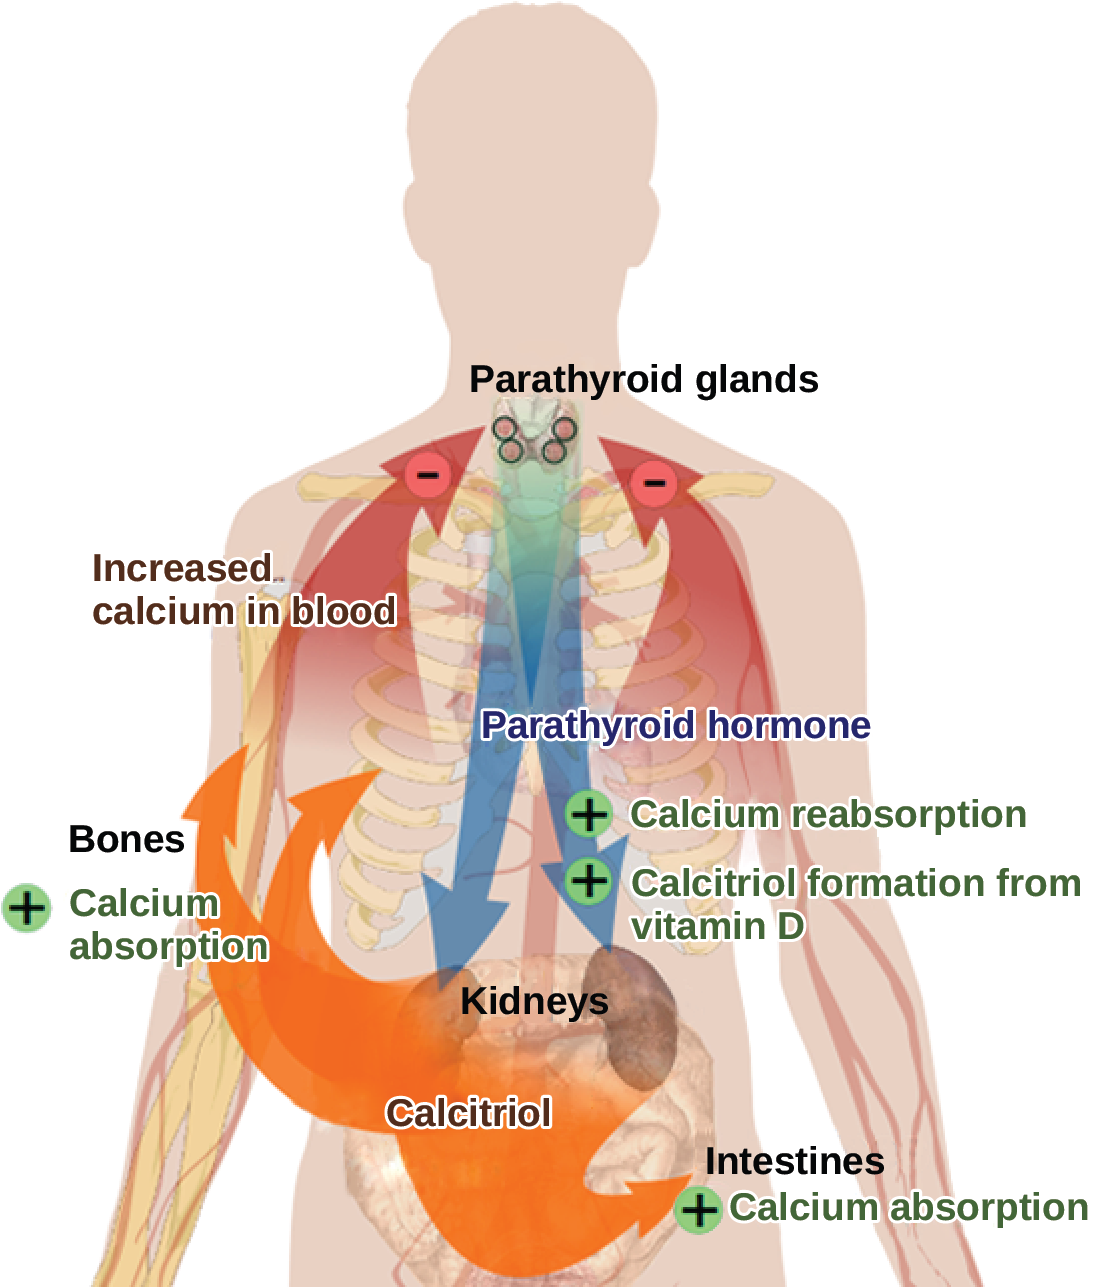 The parathyroid glands, which are located in the neck, release parathyroid hormone, or P T H. P T H causes the release of calcium from bone and triggers the reabsorption of calcium from the urine in the kidneys. P T H also triggers the formation of calcitriol from vitamin D. Calcitriol causes the intestines to absorb more calcium. The result is increased calcium in the blood.